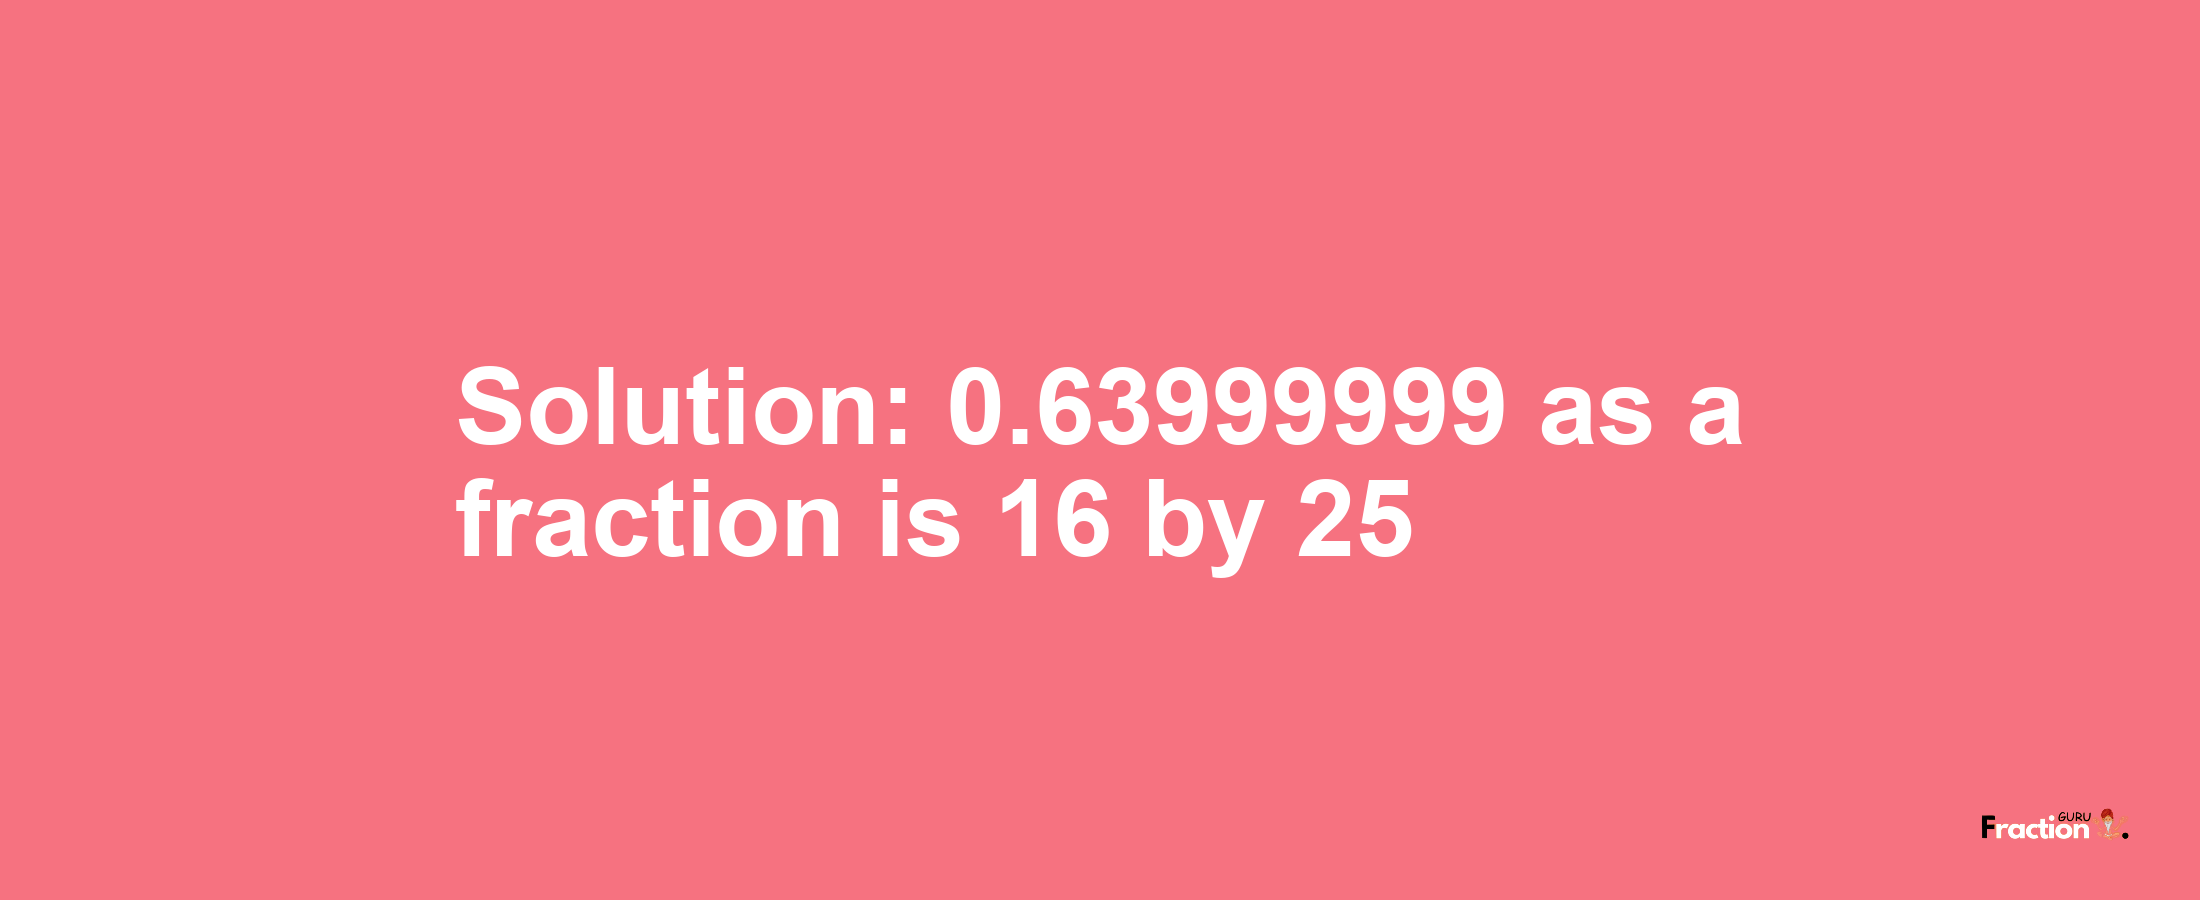 Solution:0.63999999 as a fraction is 16/25